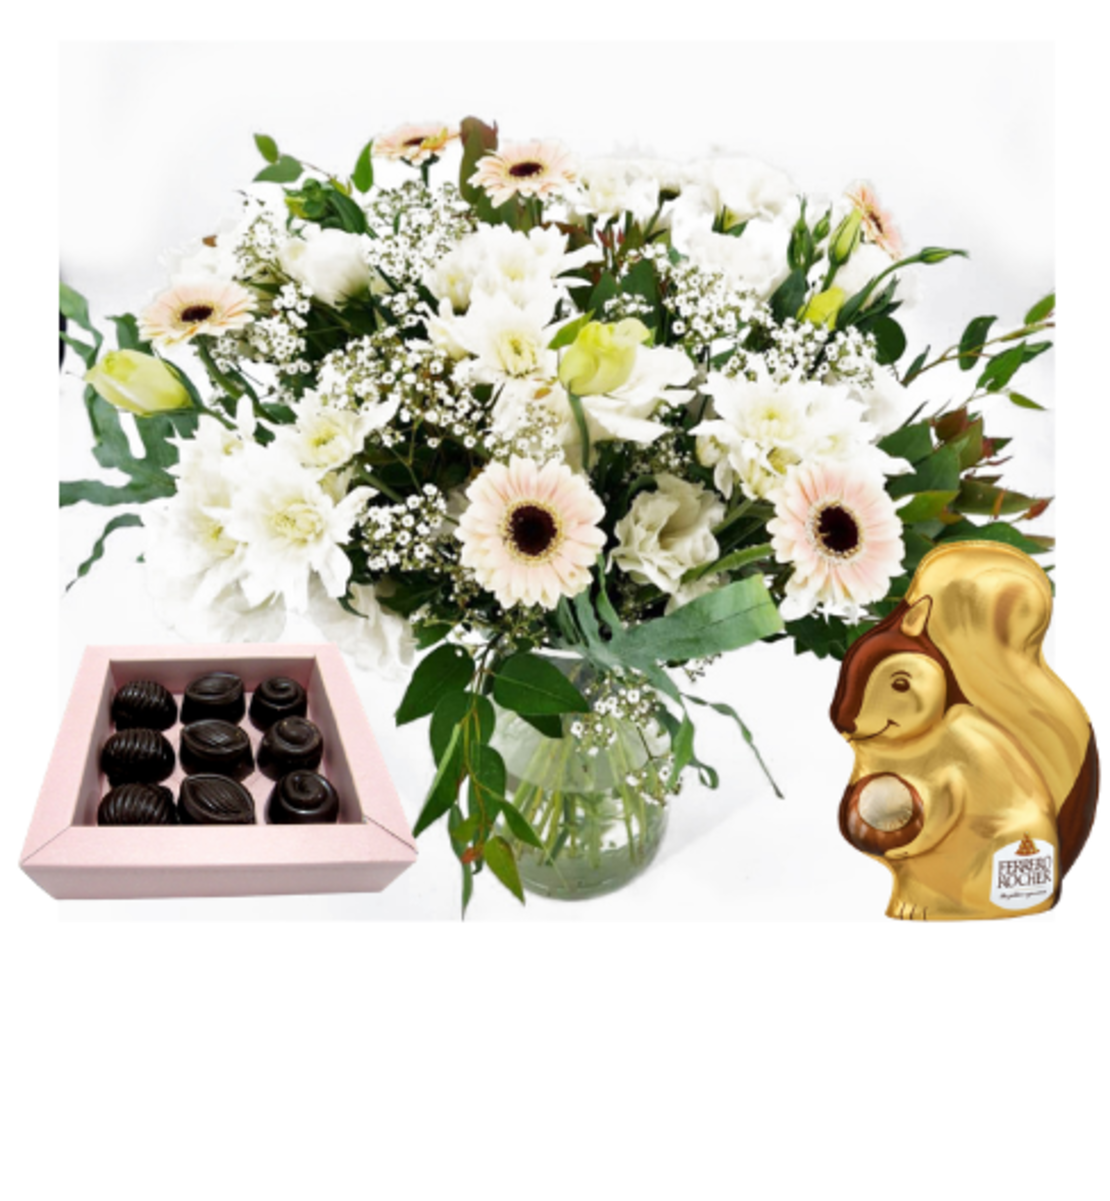 Flower bouquet - Pesach in London with chocolate (Kosher for Passover)